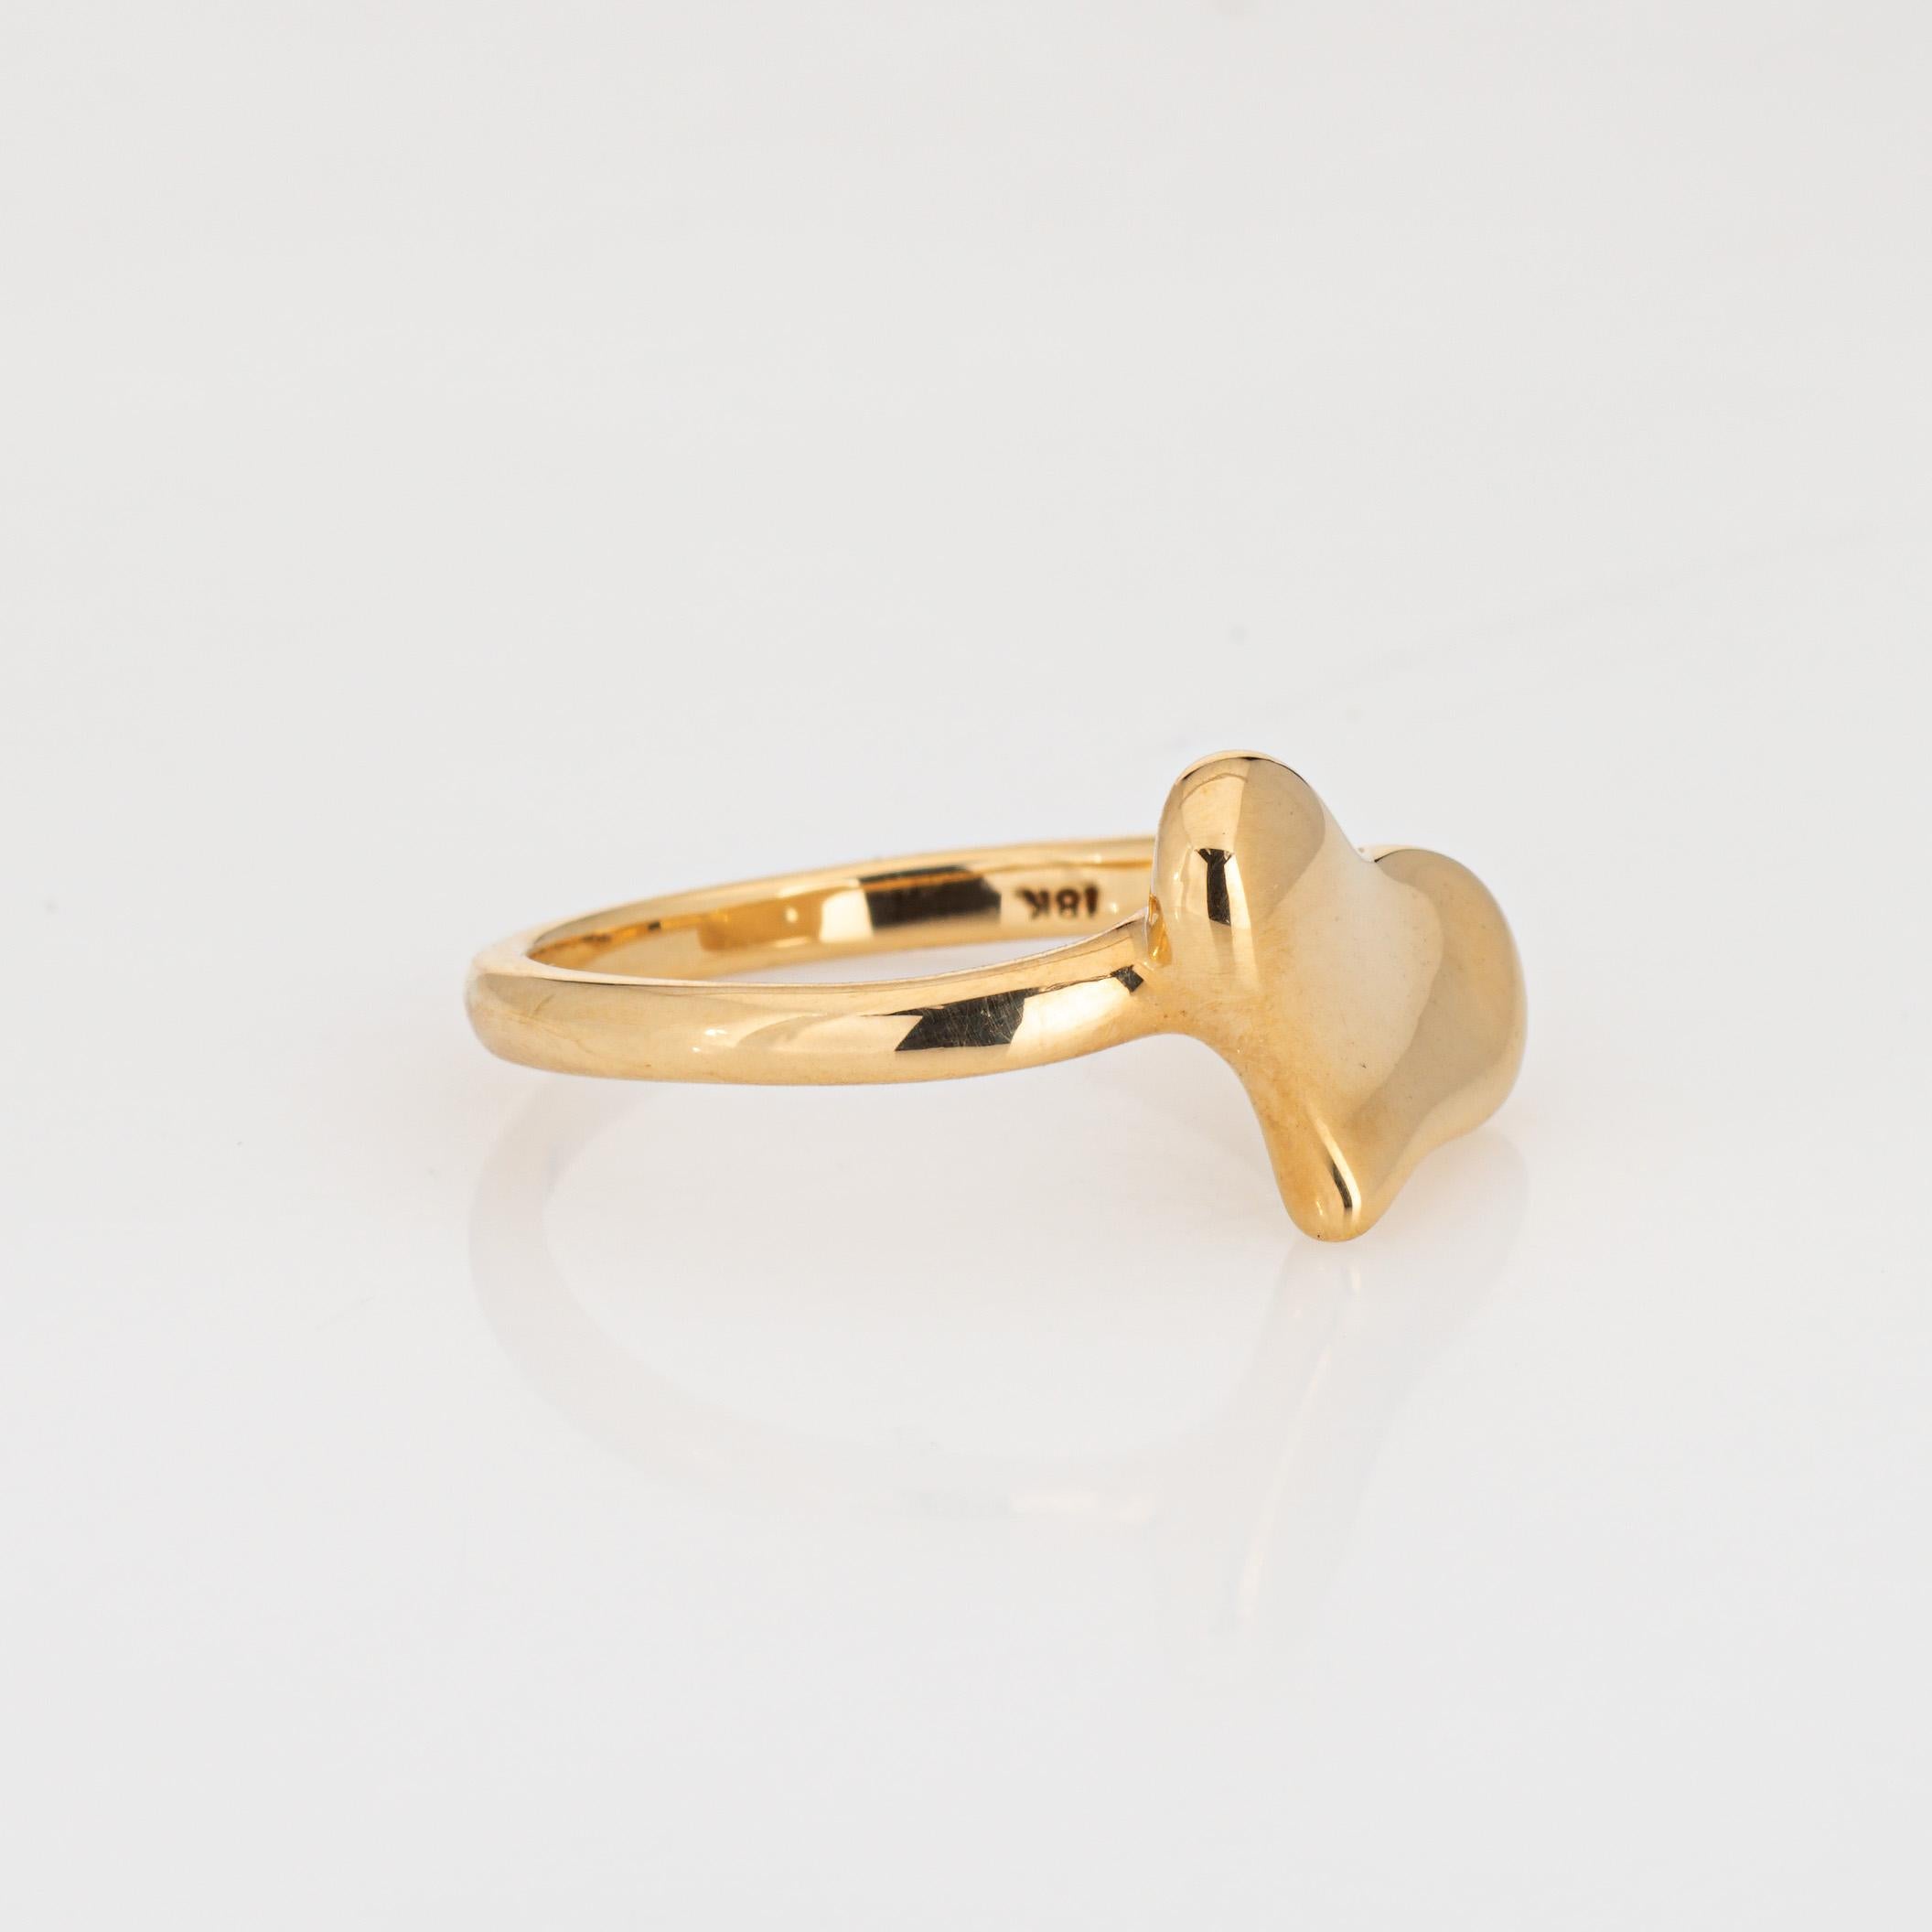 Modern c1992 Angela Cummings Heart Ring Vintage 18k Yellow Gold Sz 6.5 Signed Jewelry For Sale